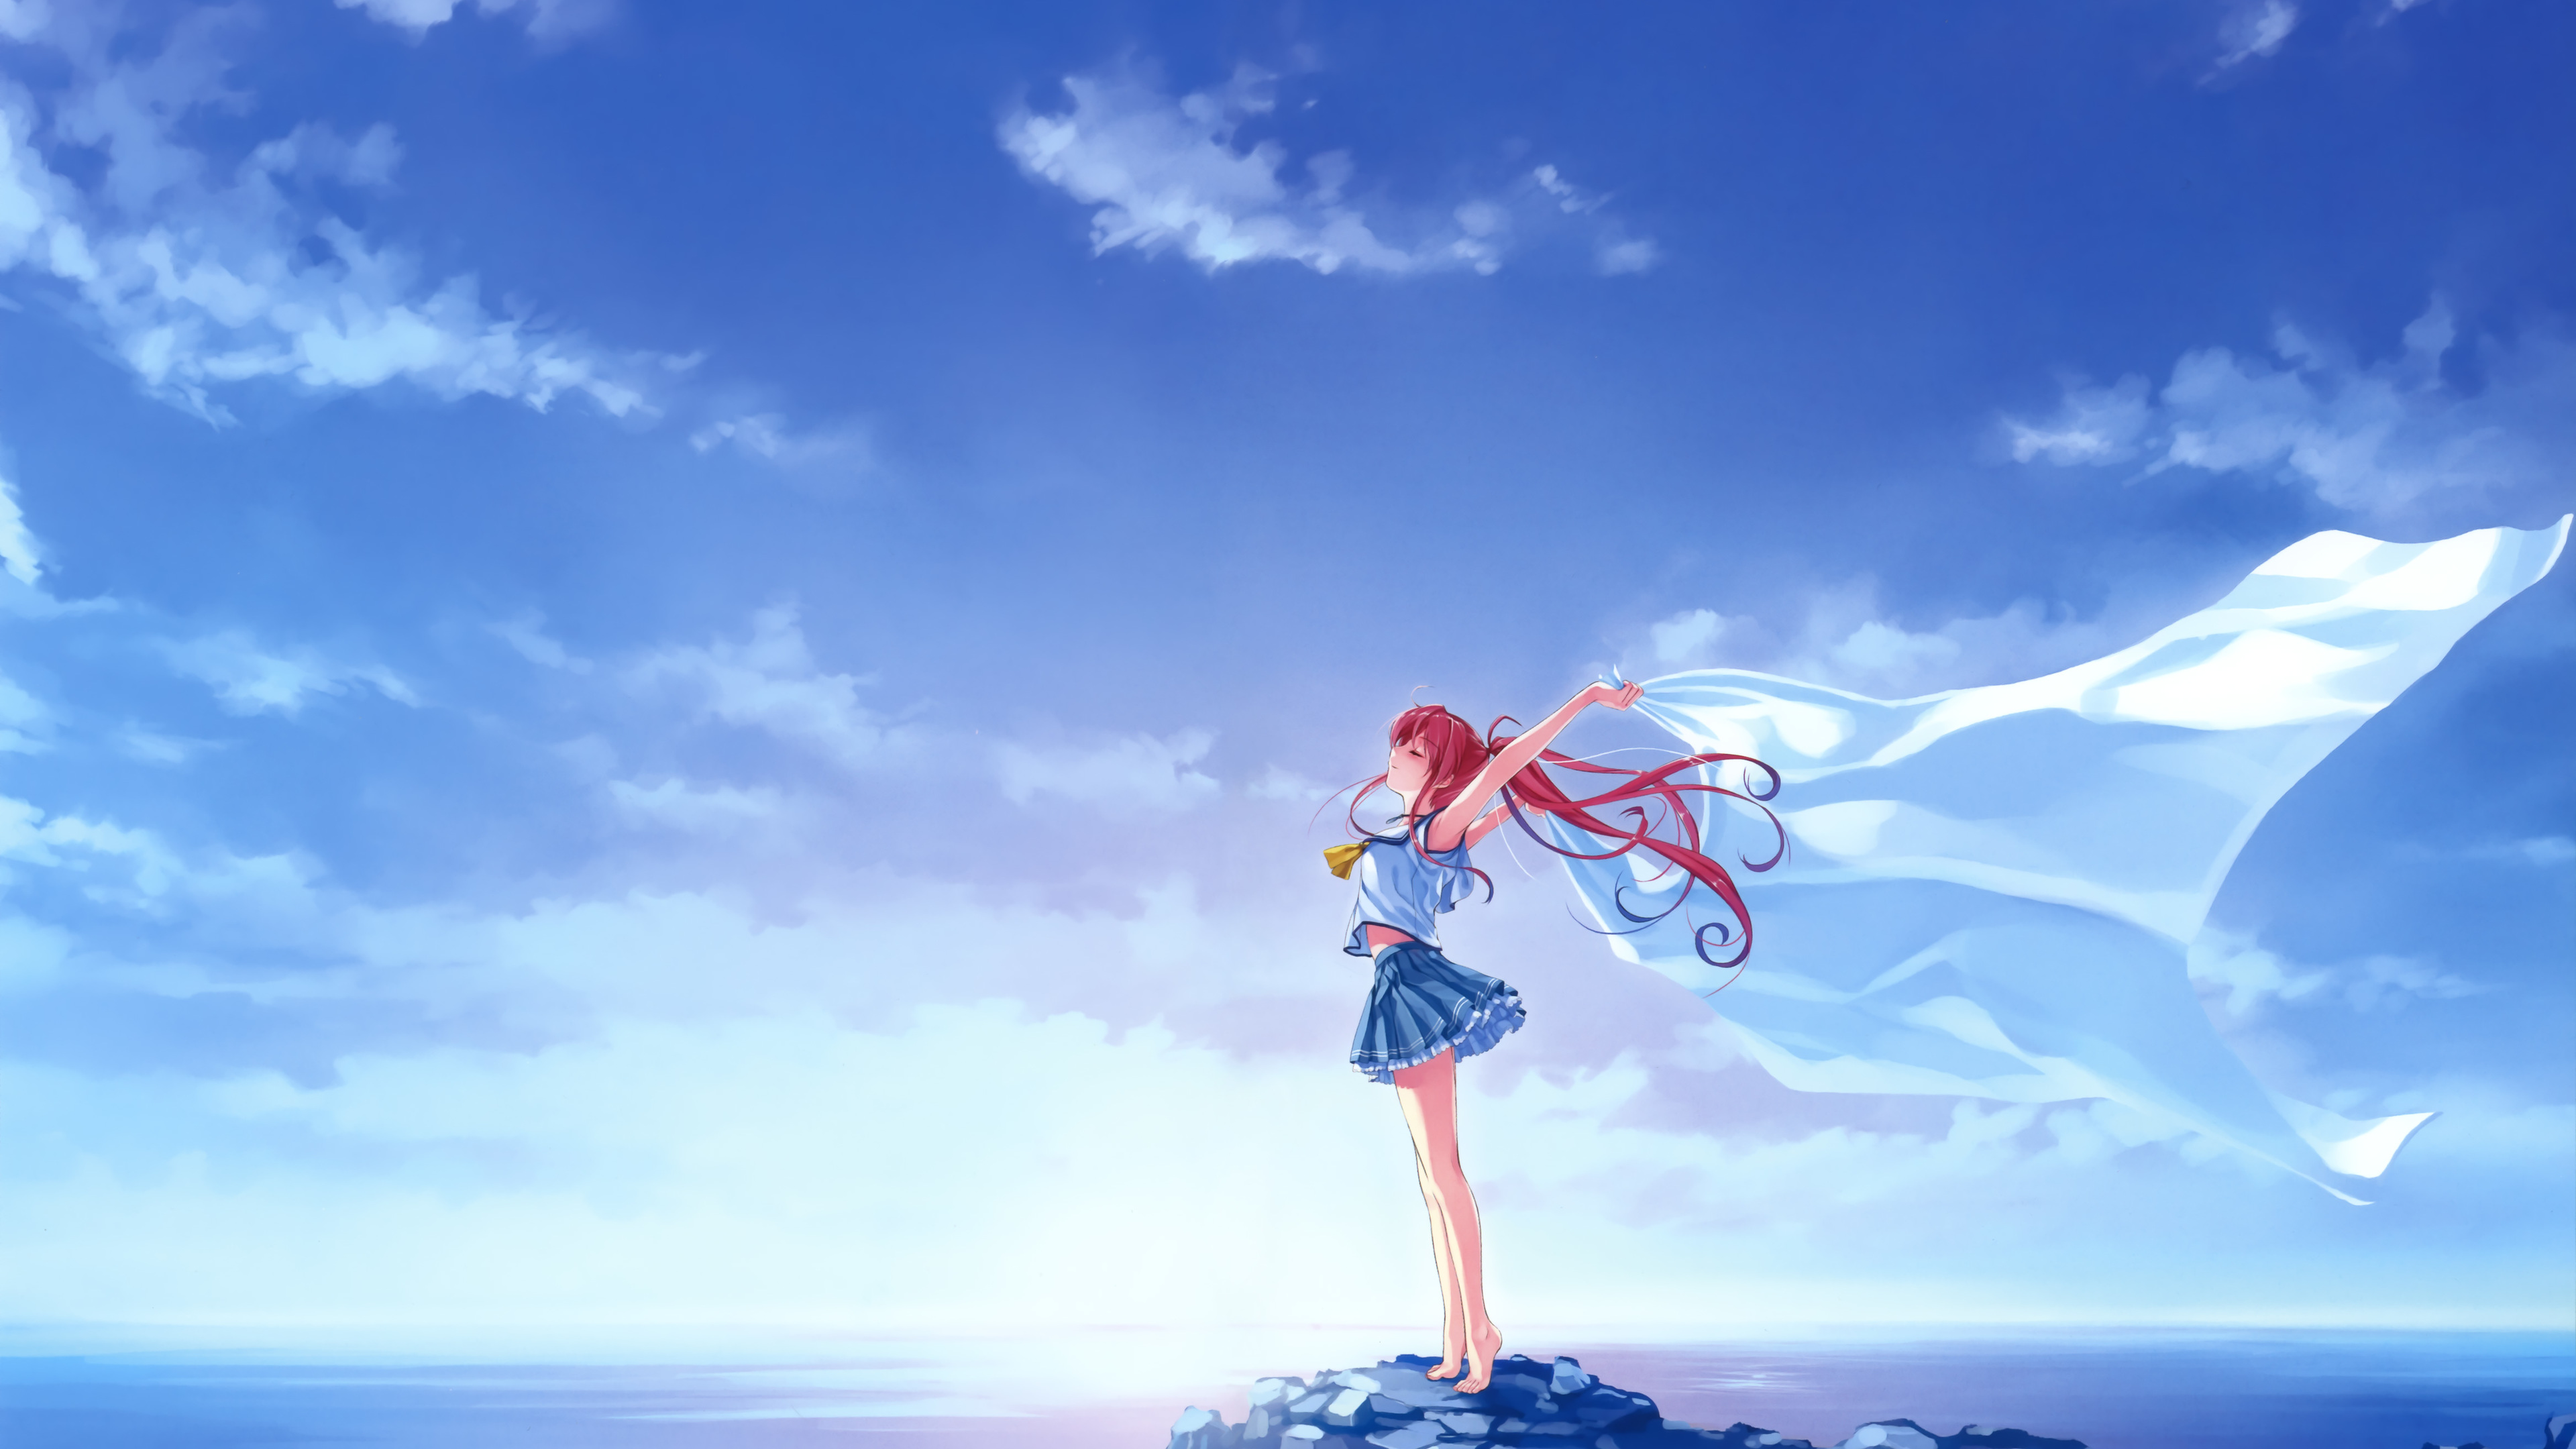 deep blue sky and pure white wings 1541974003 - Deep Blue Sky And Pure White Wings - hd-wallpapers, deep blue sky and pure white wings wallpapers, anime wallpapers, anime girl wallpapers, 4k-wallpapers